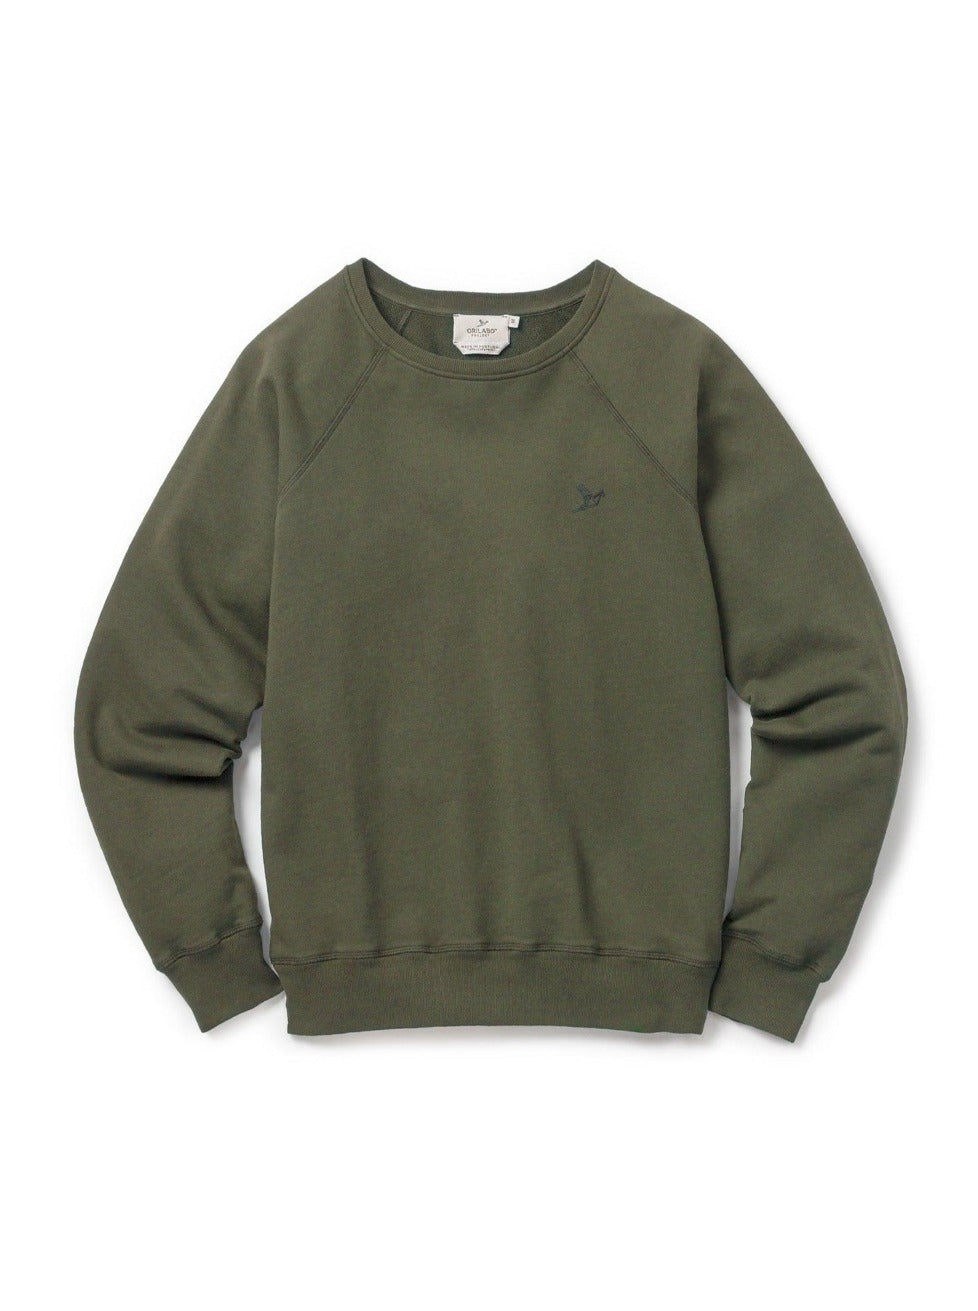 Men's Terry Crewneck - Olive - ORILABO Project